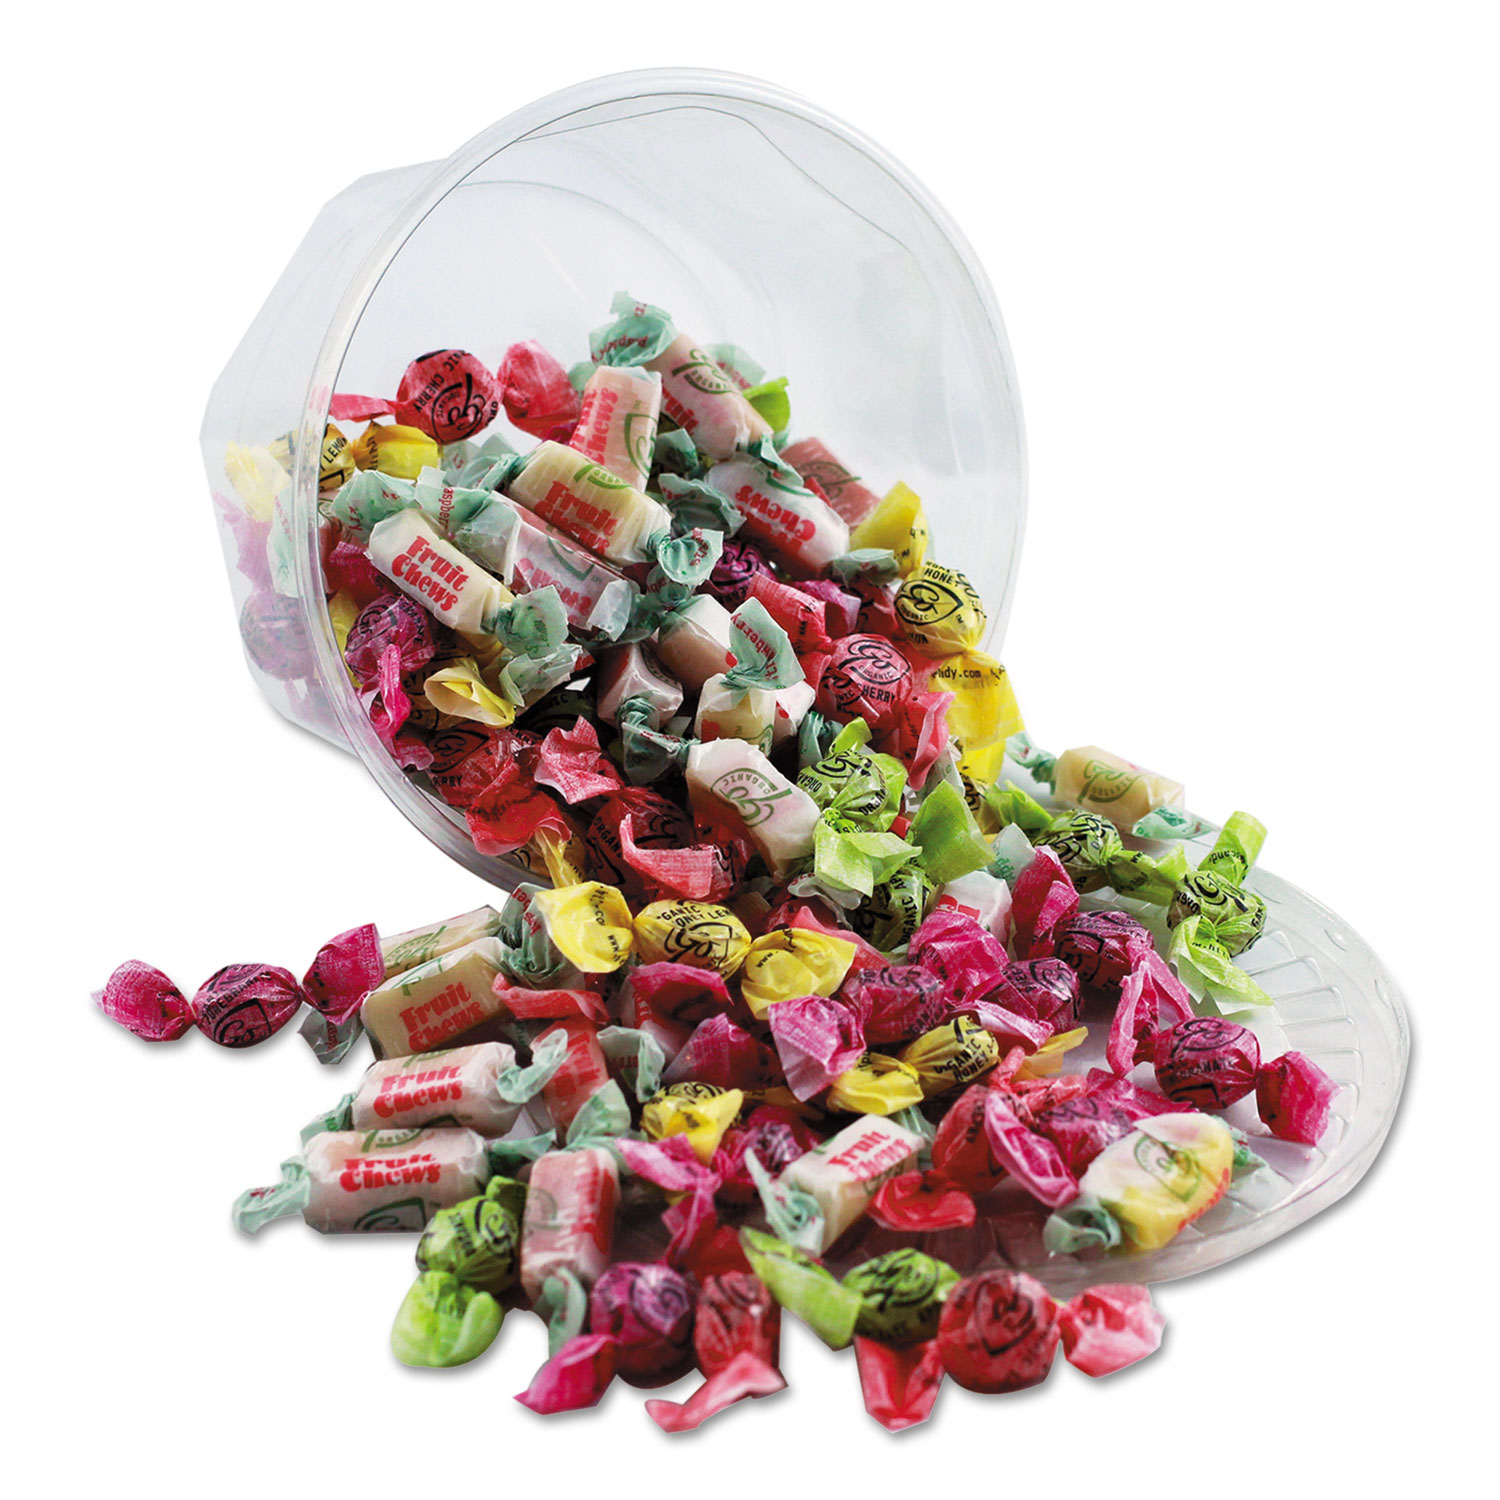 Candy Assortments, Assorted Organic Candy, 16.5 oz Resealable Tub